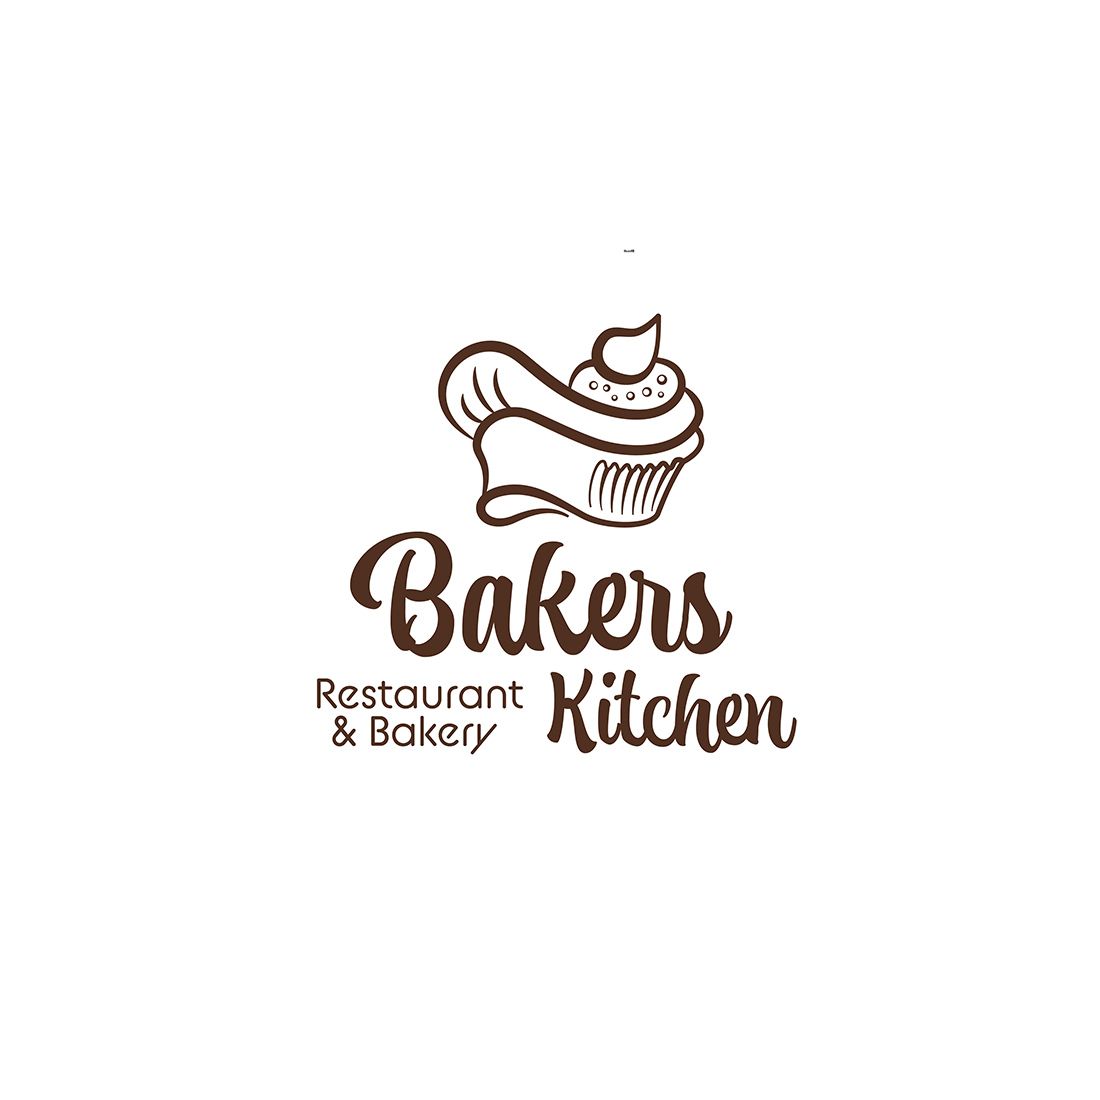 Download Bakers Kitchen Logo for your business.